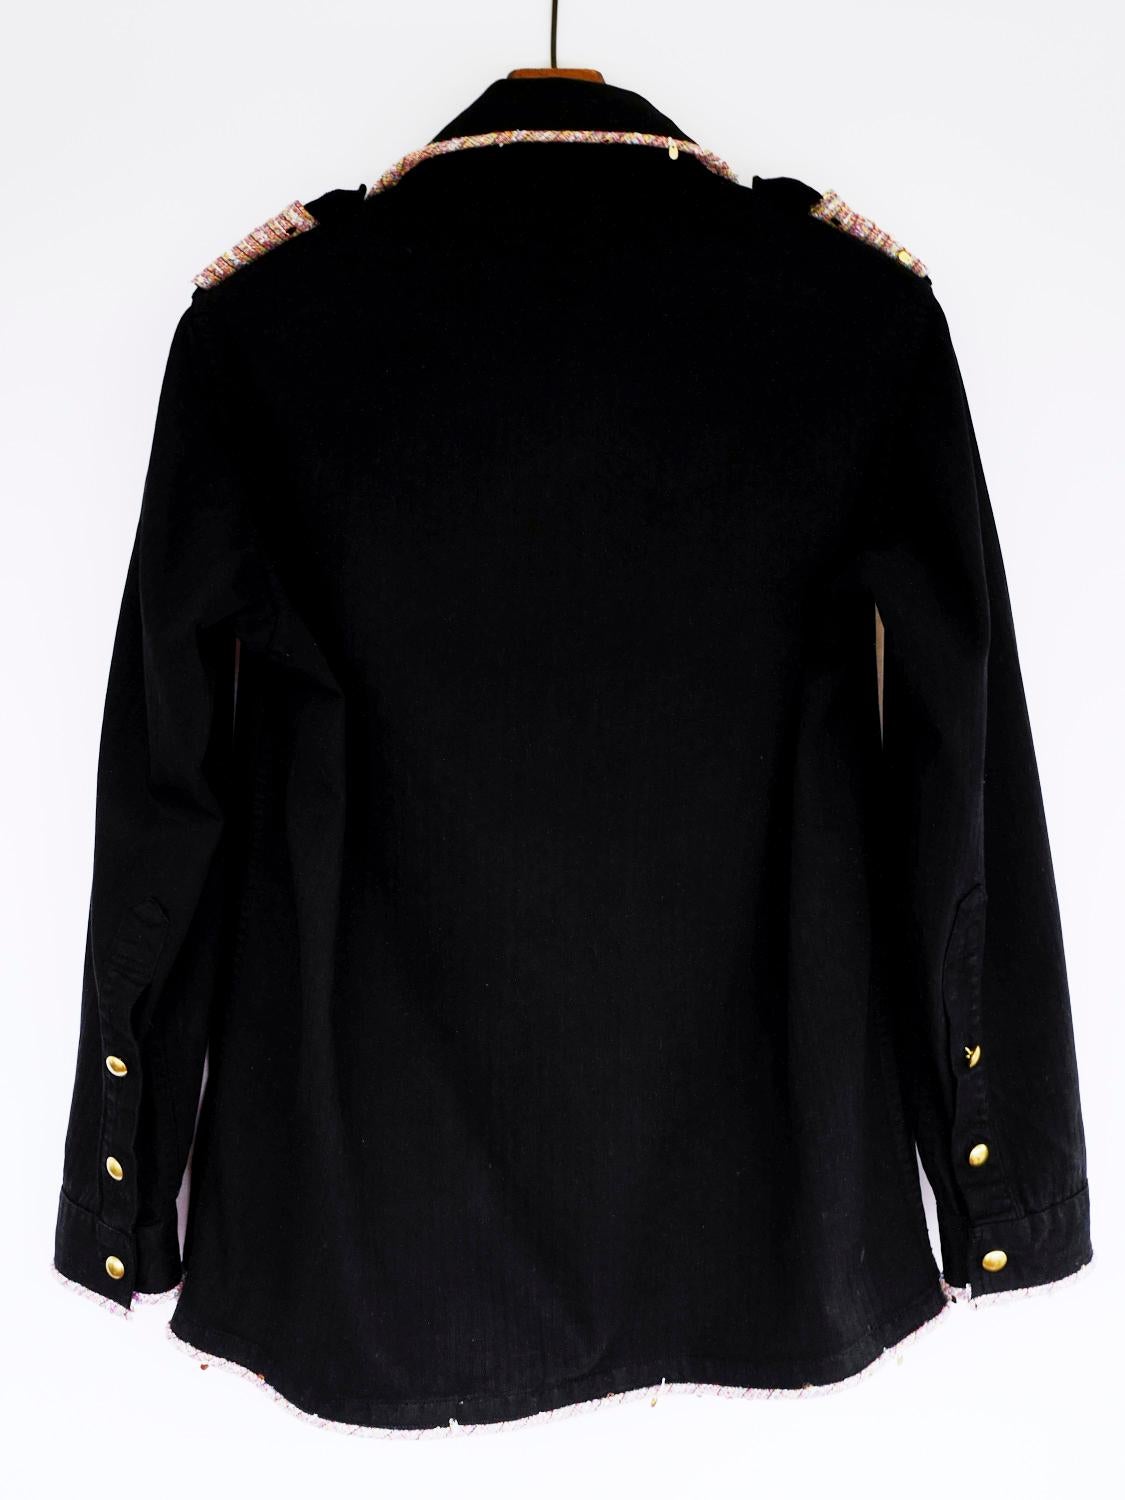 Embellished Jacket Black Military Sequin Gold Pink Tweed M/L J Dauphin In New Condition In Los Angeles, CA